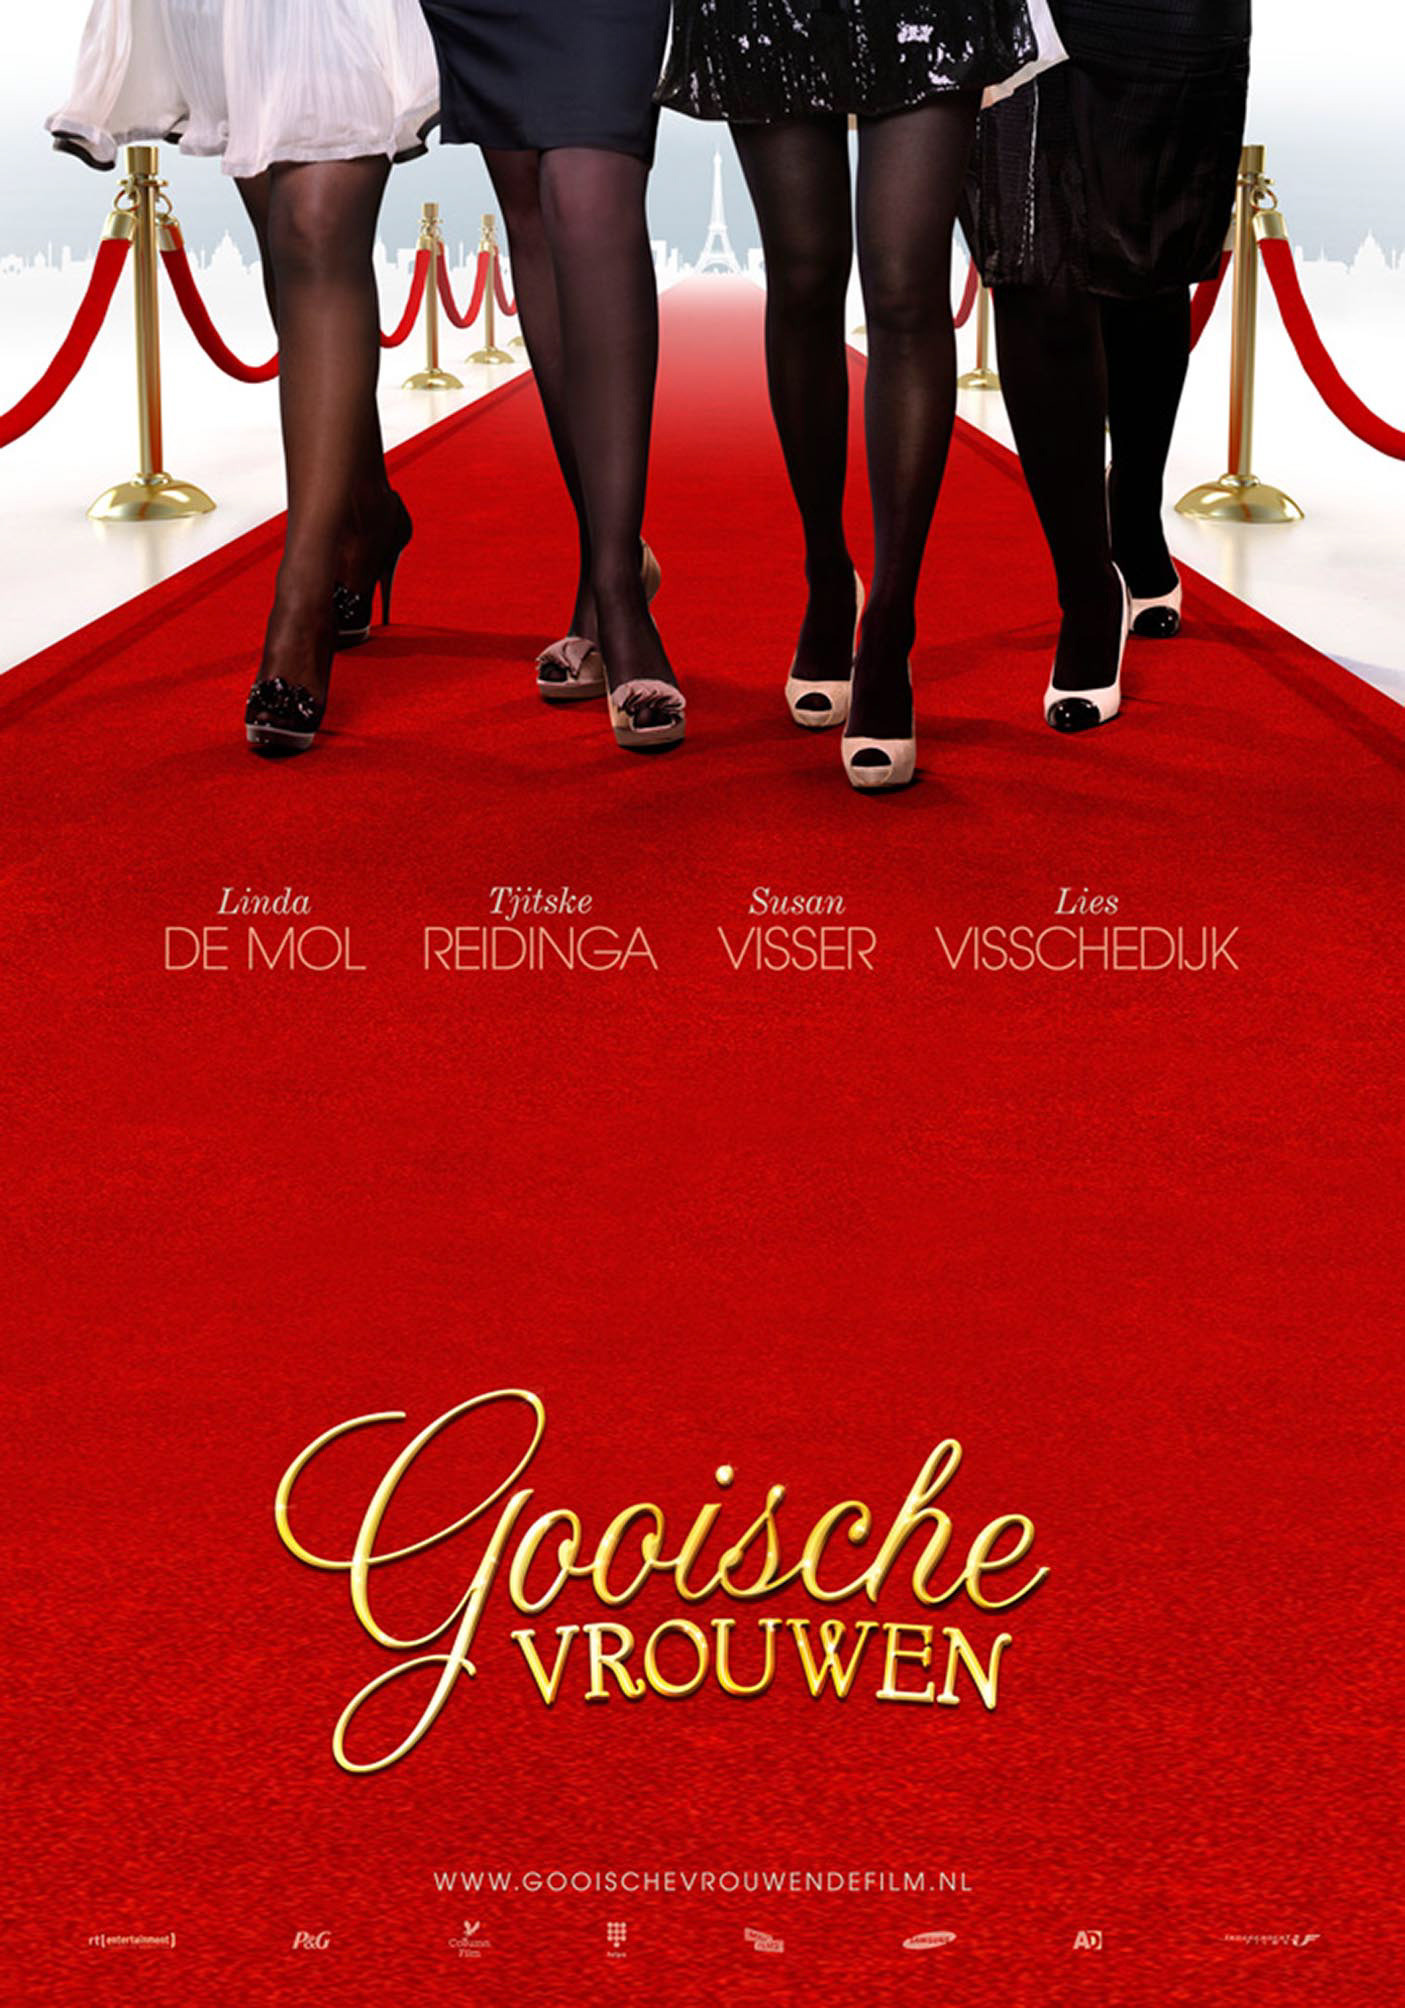 Mega Sized Movie Poster Image for Gooische vrouwen (#1 of 3)